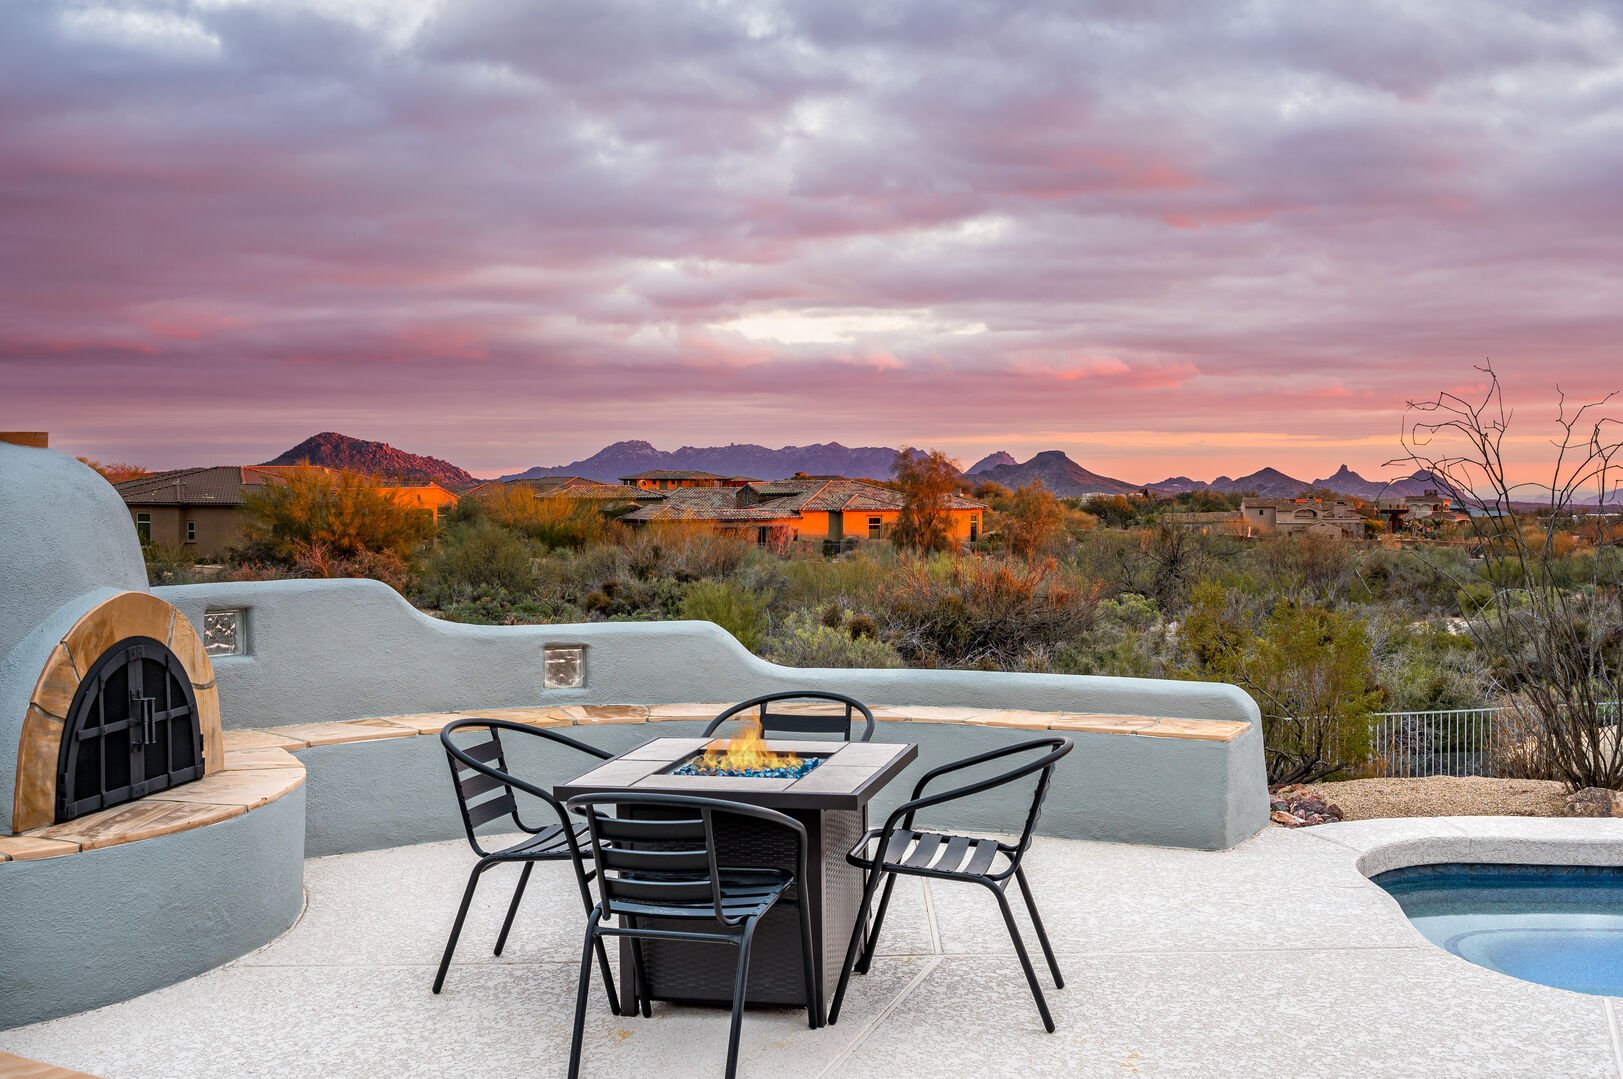 Gather around the fire with amazing views.